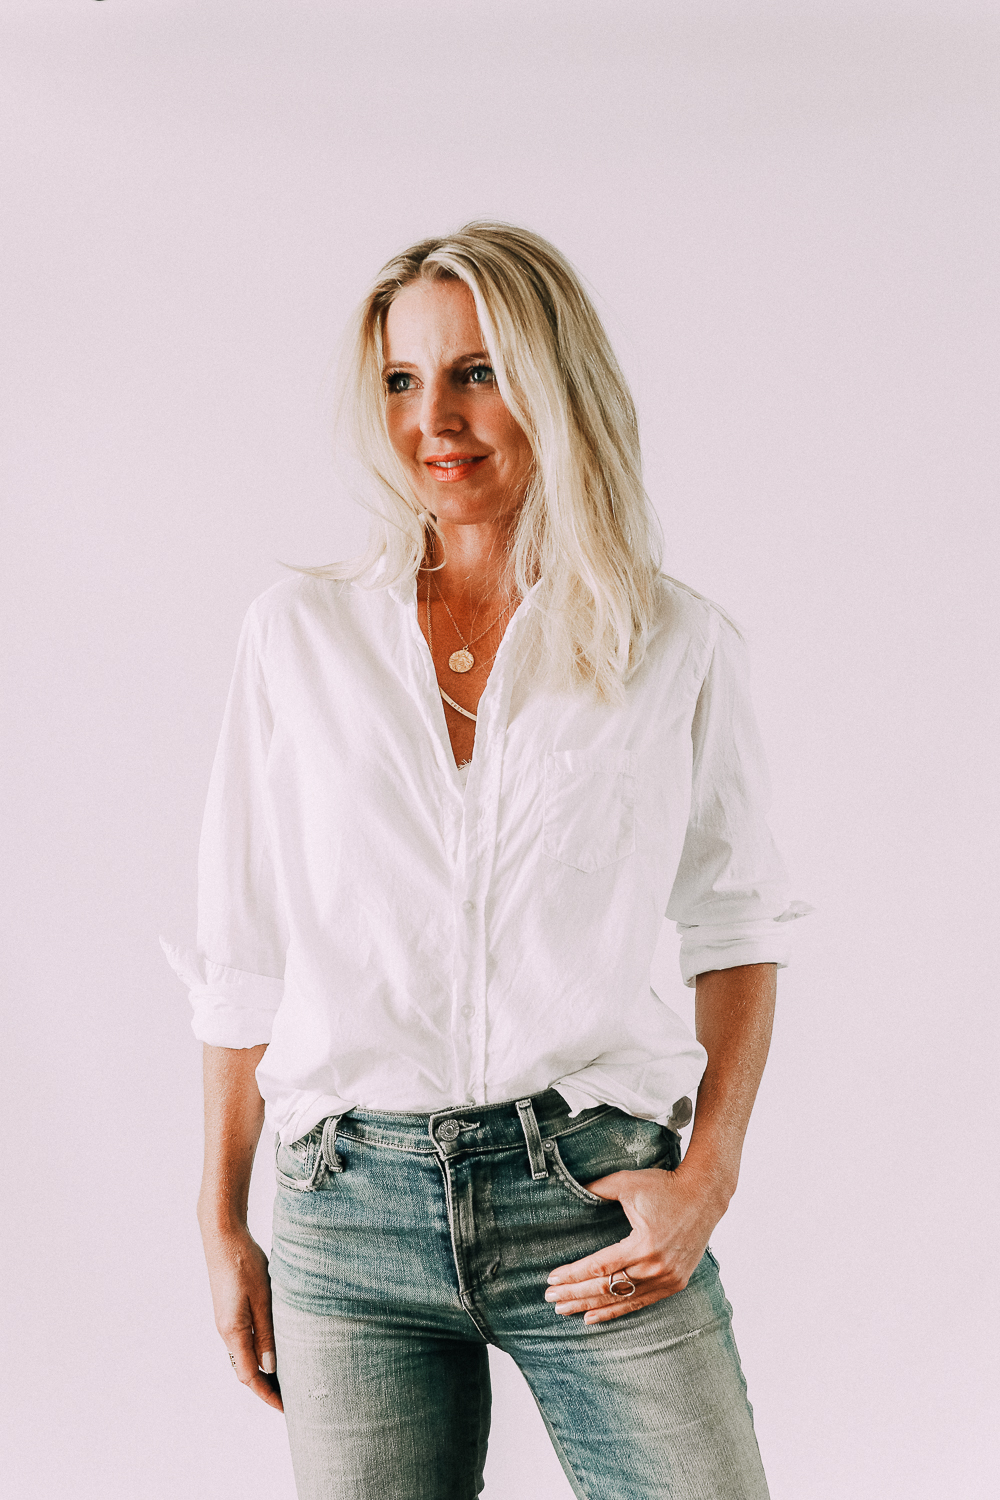 Women's fashion blogger, Erin Busbee, shares 5 fashion tips and cuffs the sleeves of her white button down shirt